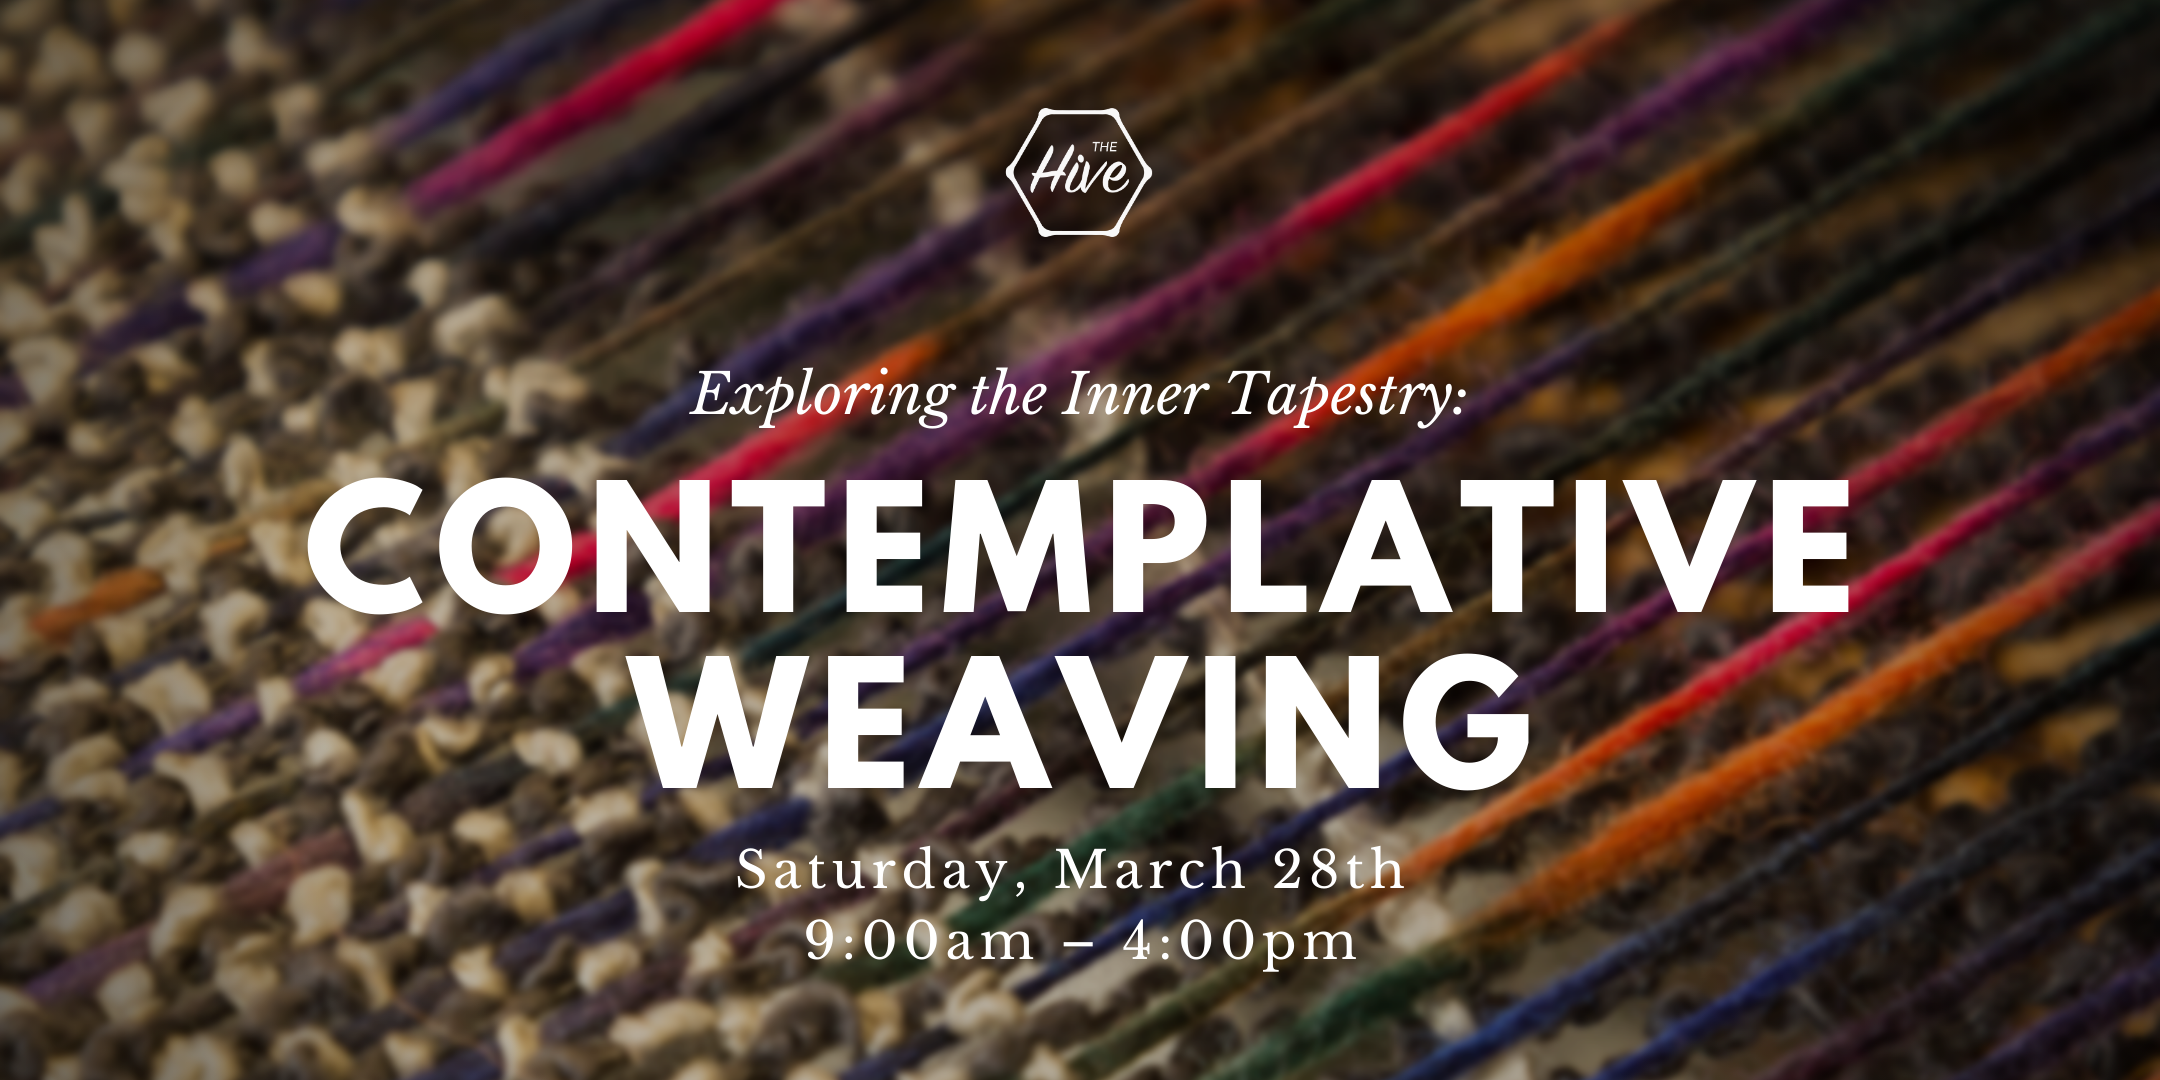 Exploring the Inner Tapestry: Contemplative Weaving